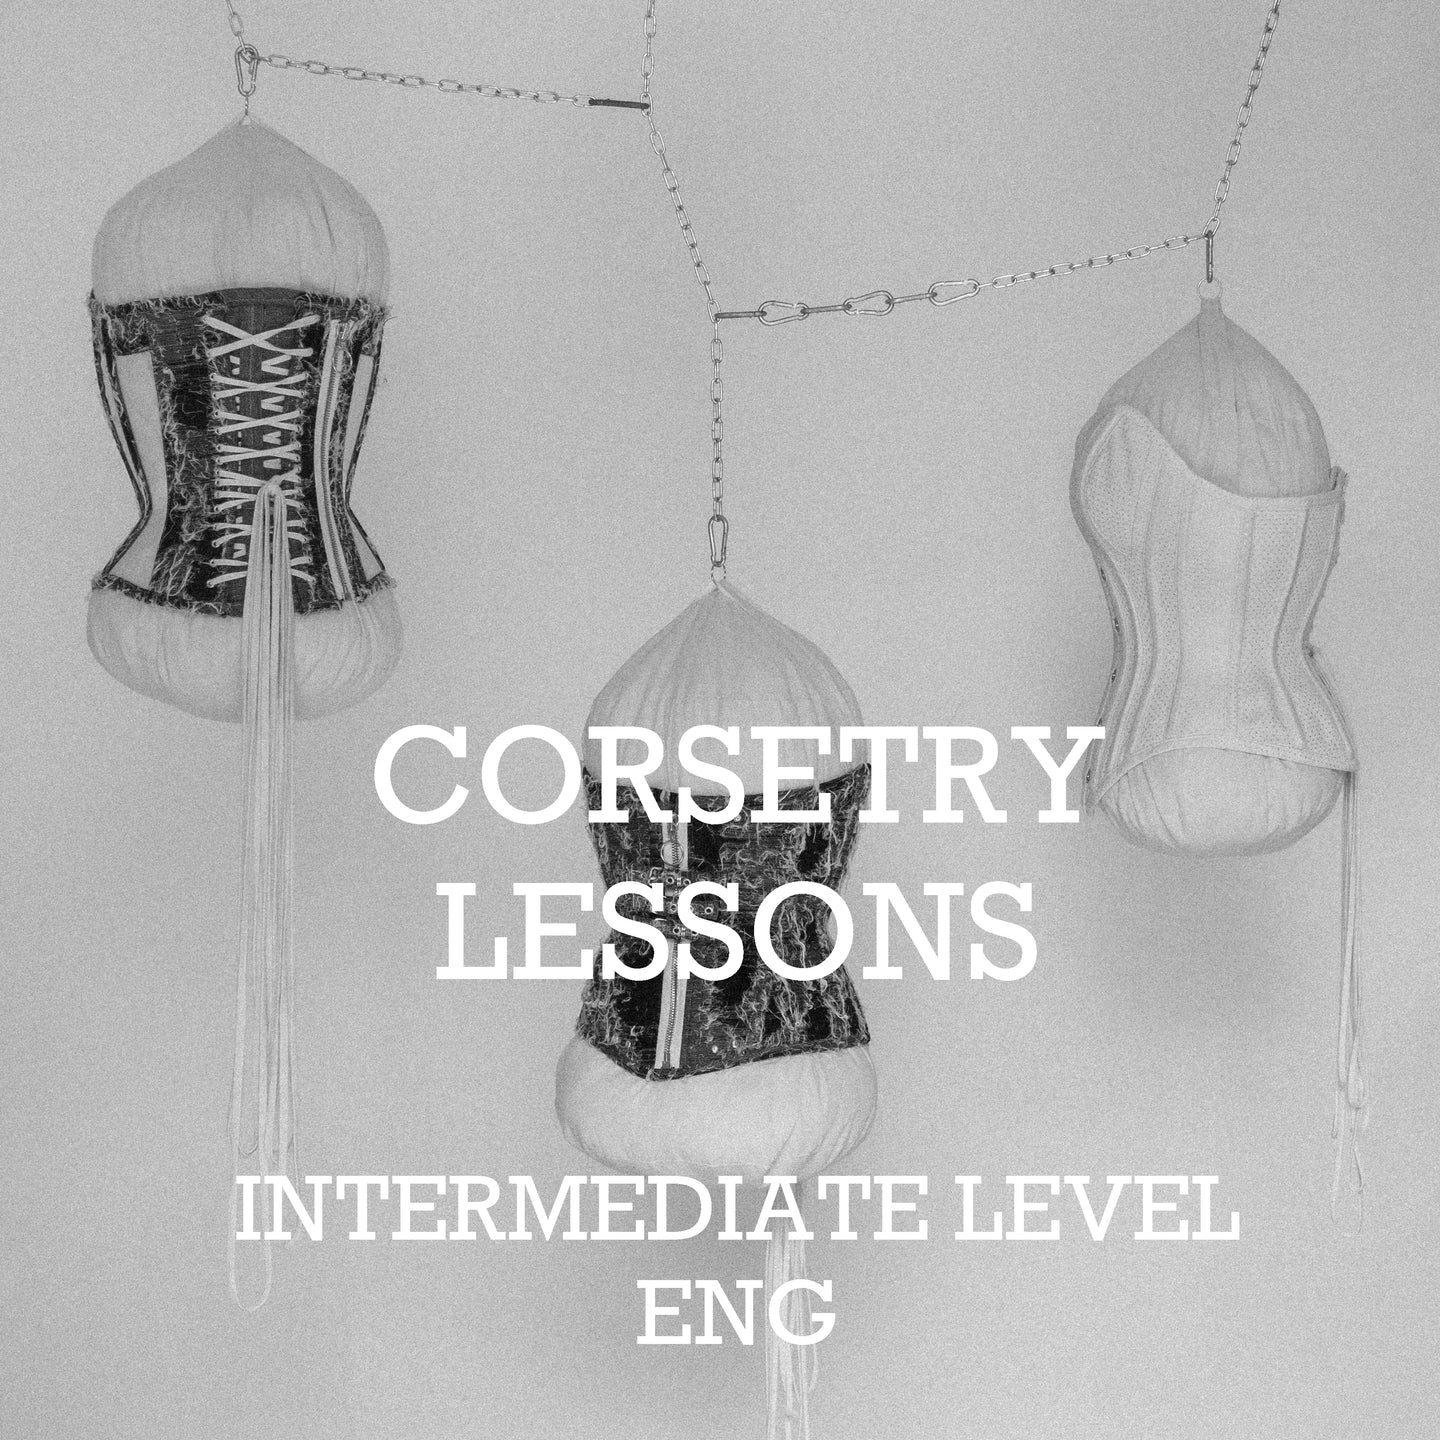 CORSETRY LESSONS - intermediate level ENG